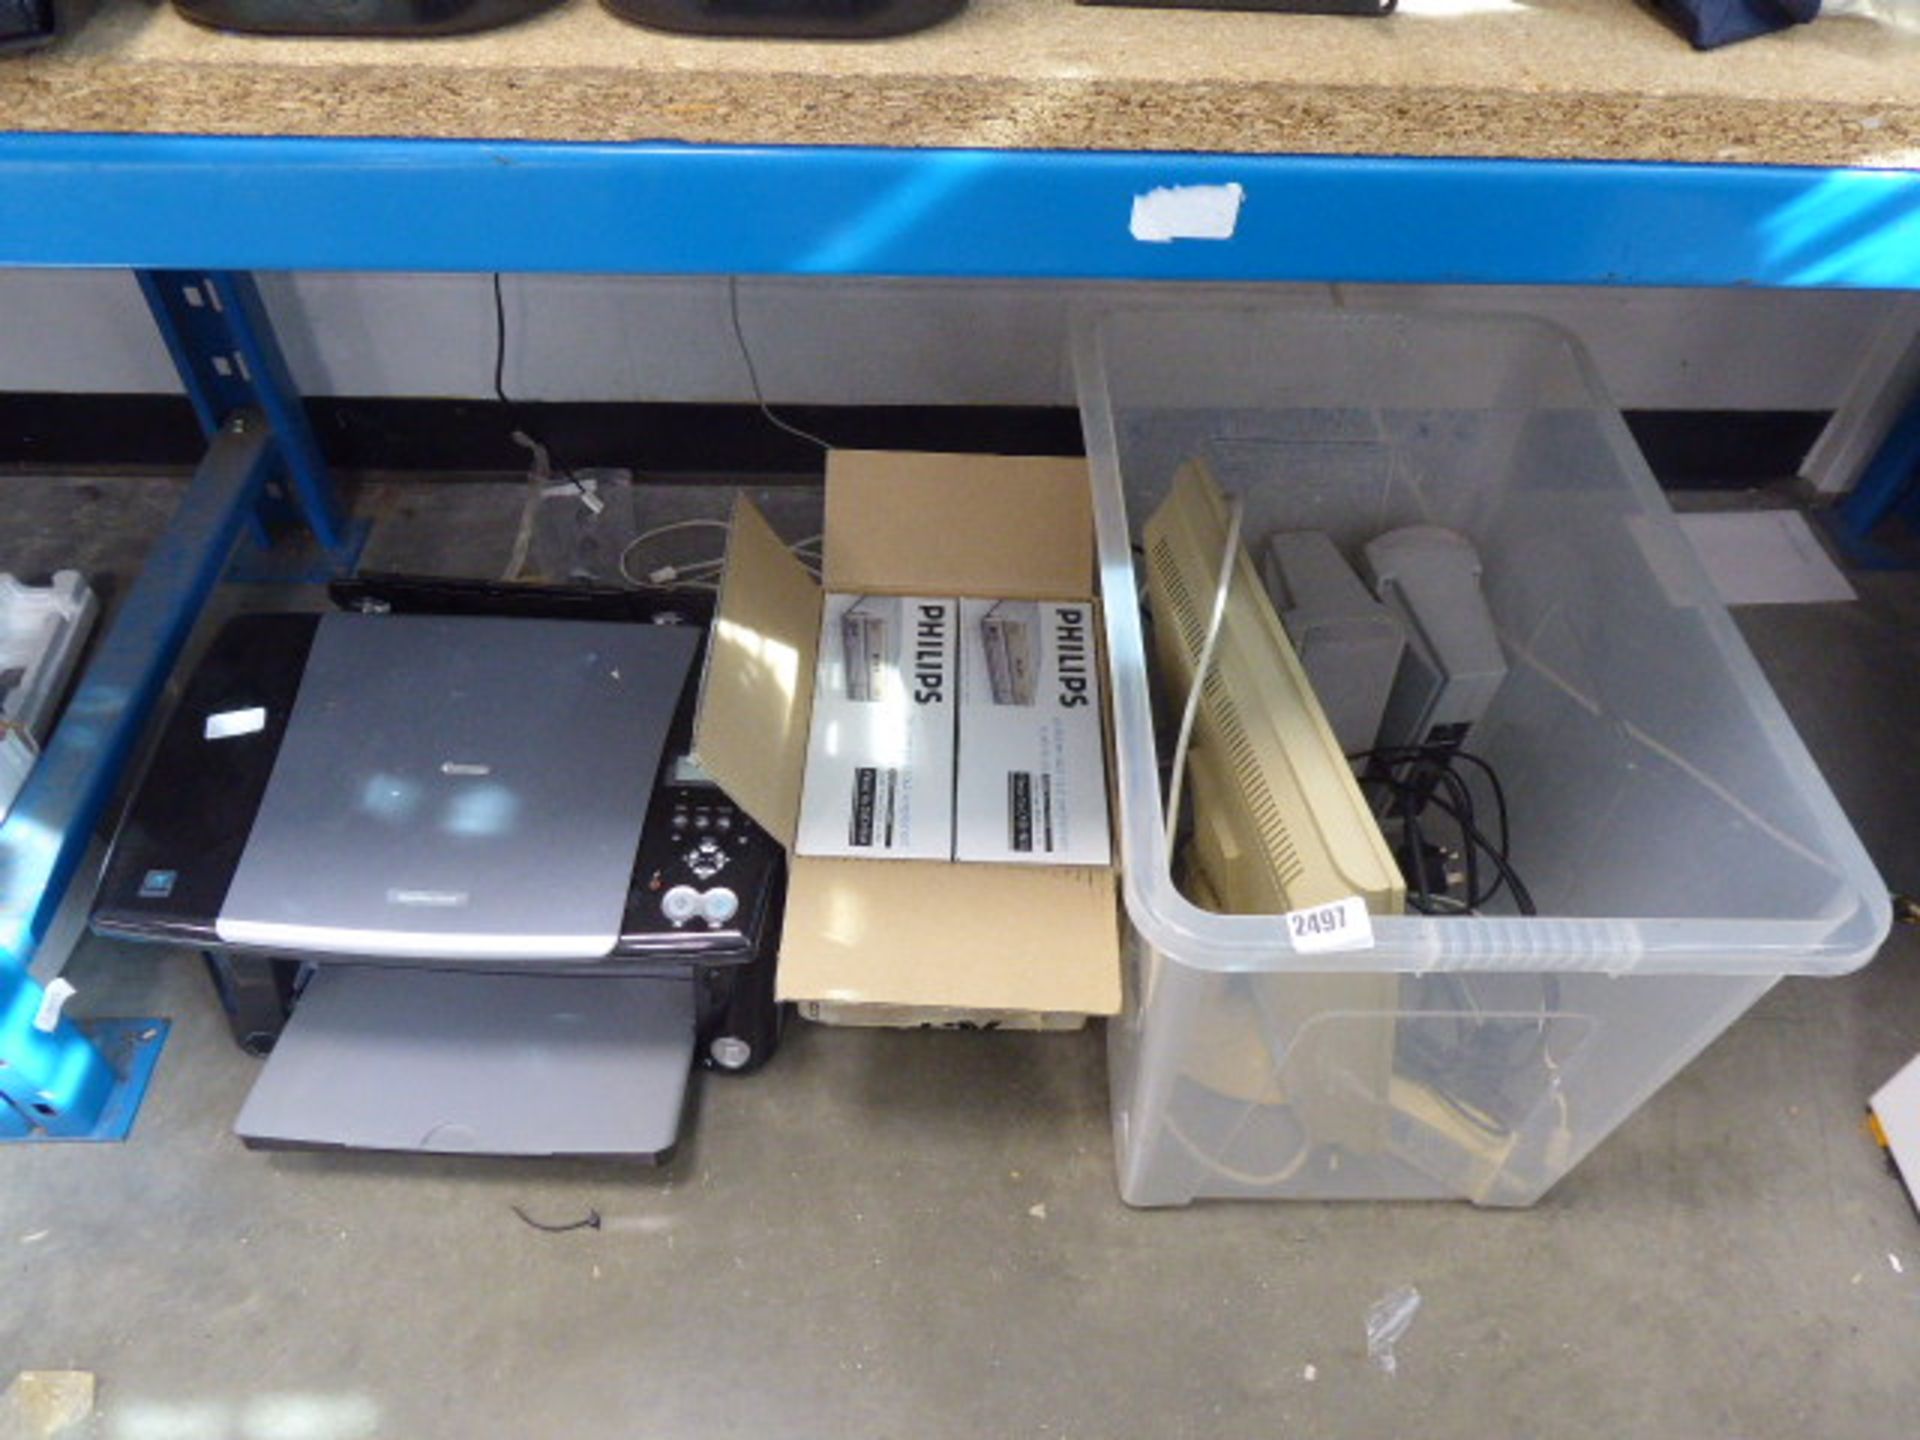 2468 - Canon Smart Base printer together with Phillips DVD rewriters, computer accessories,